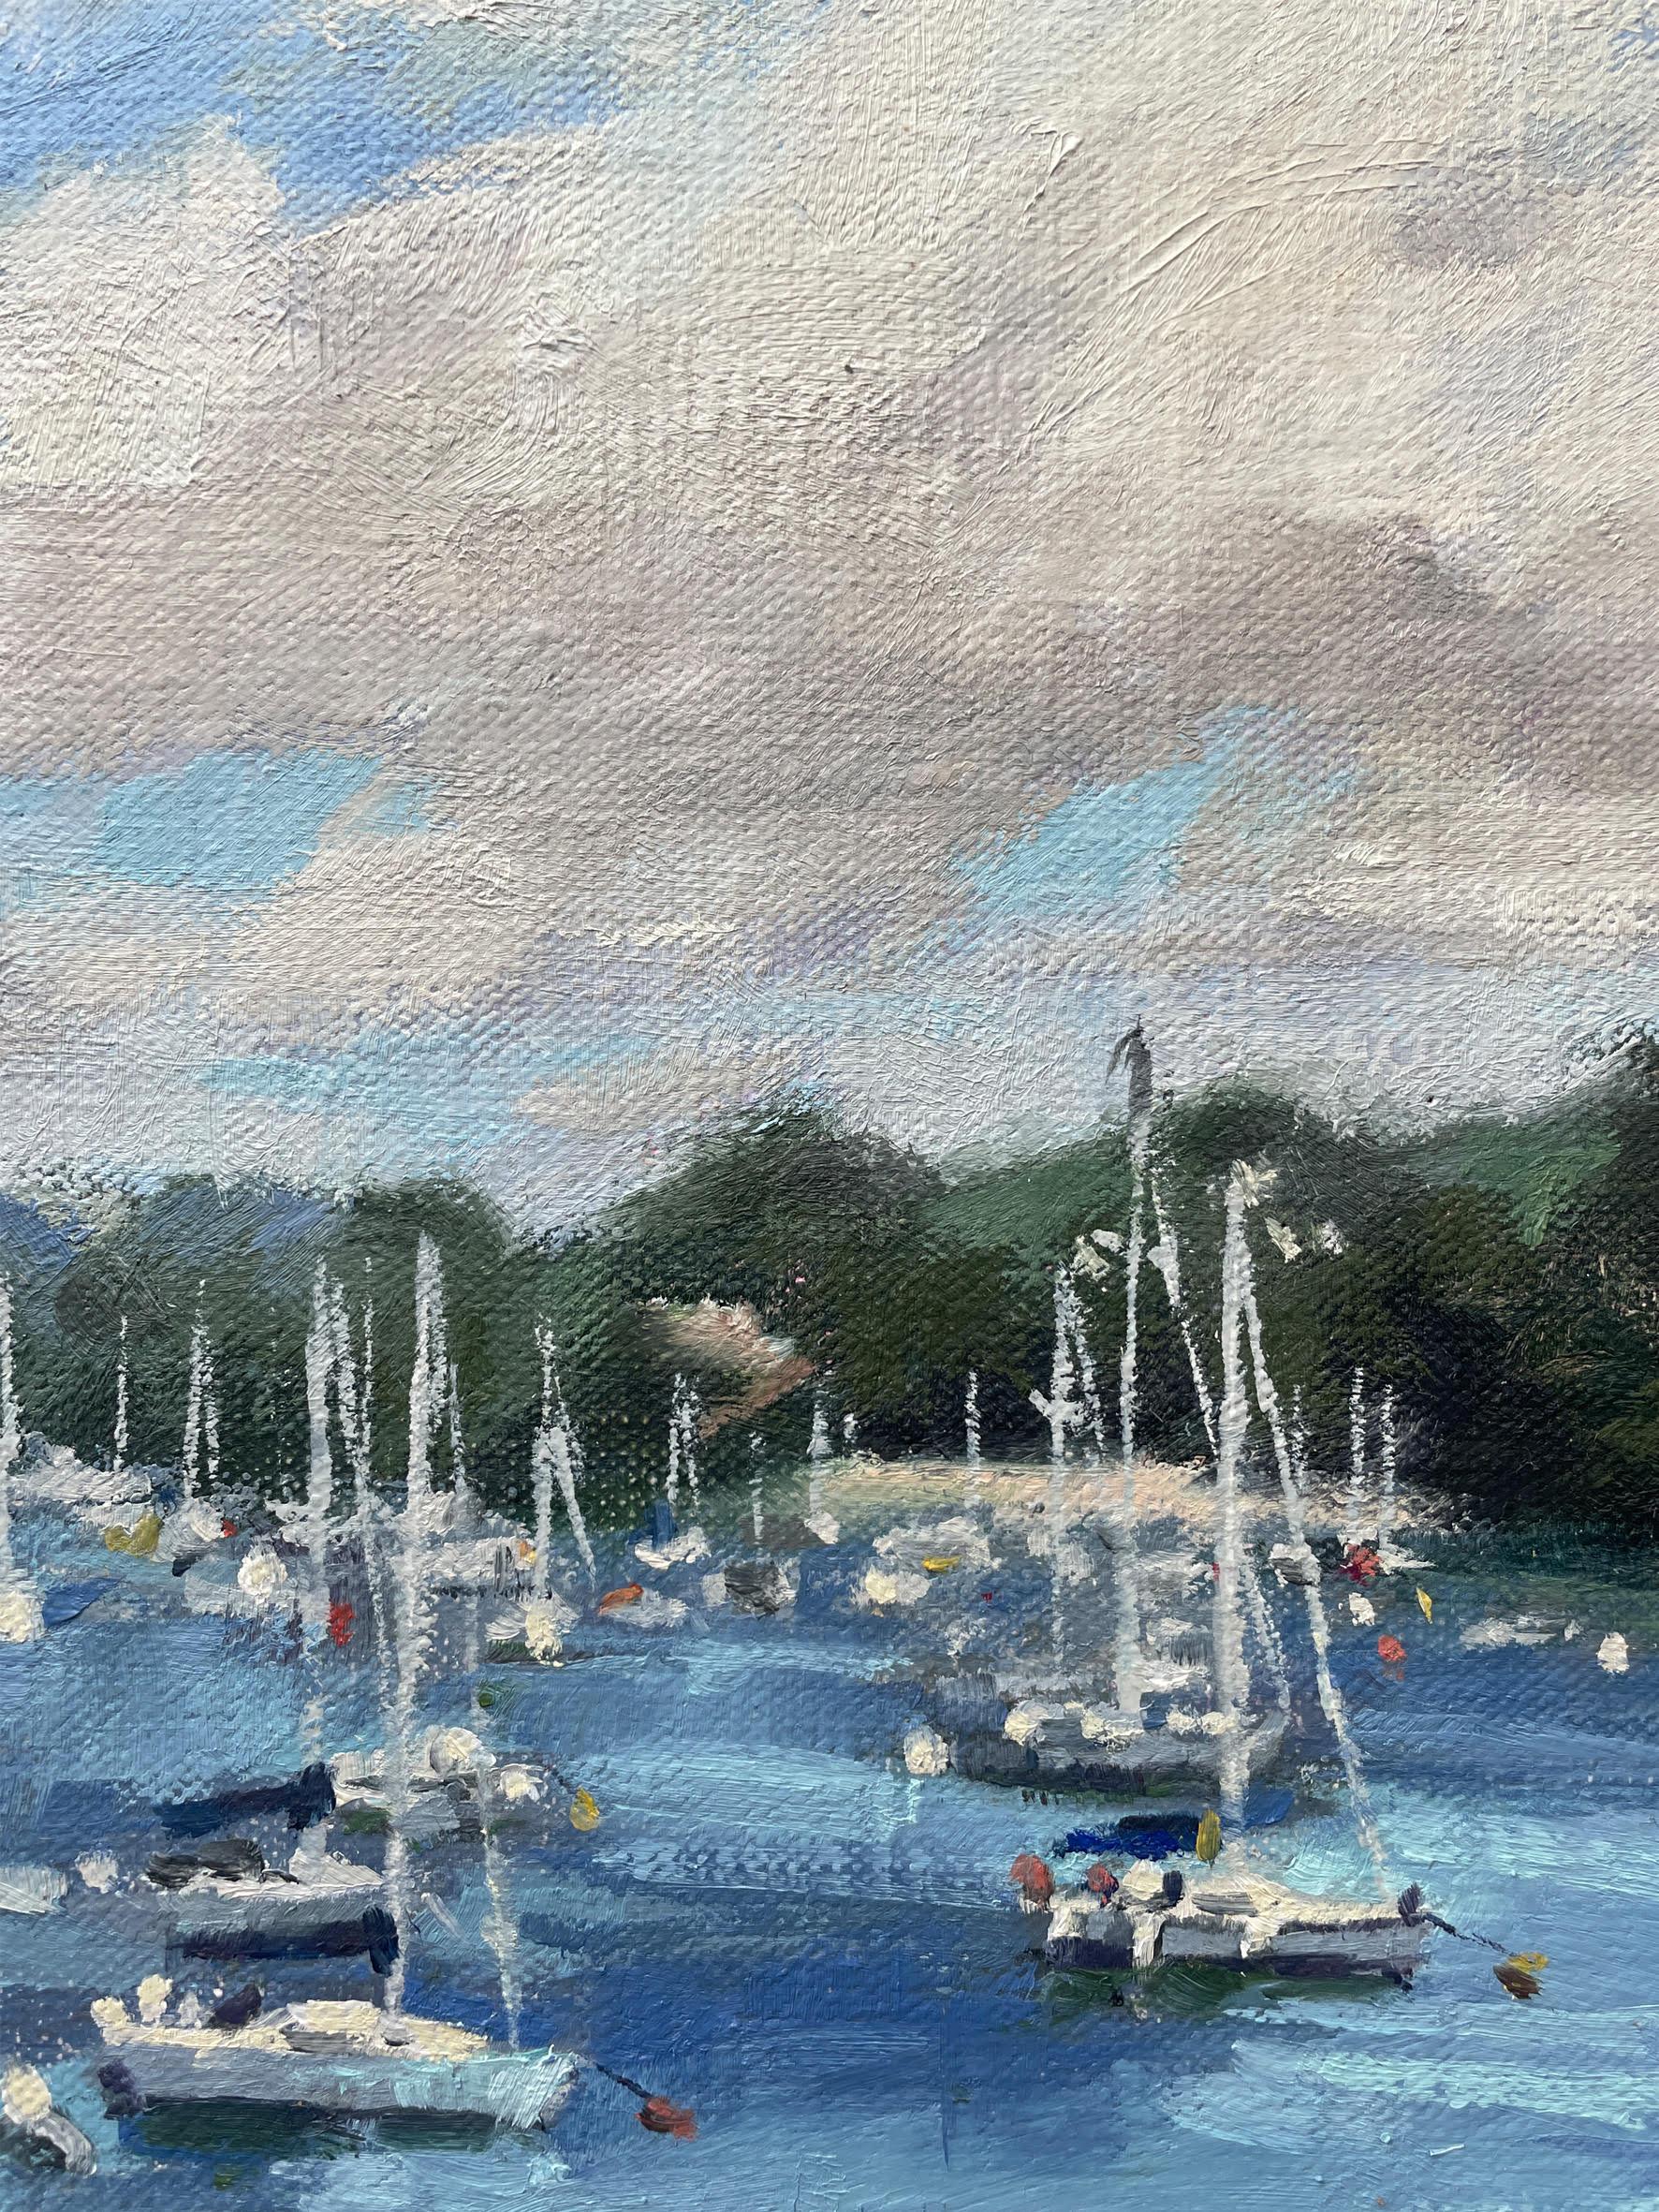 Summer in Salcombe  [2023] by Fiona Carver
Original painting
Oil paint on board
Image size: H:20 cm x W:30 cm
Complete Size of Unframed Work: H:20 cm x W:30 cm x D: 1cm
Frame Size: H: 30 cm x W:40 cm x D:2.5 cm
Sold Framed

Please note that insitu